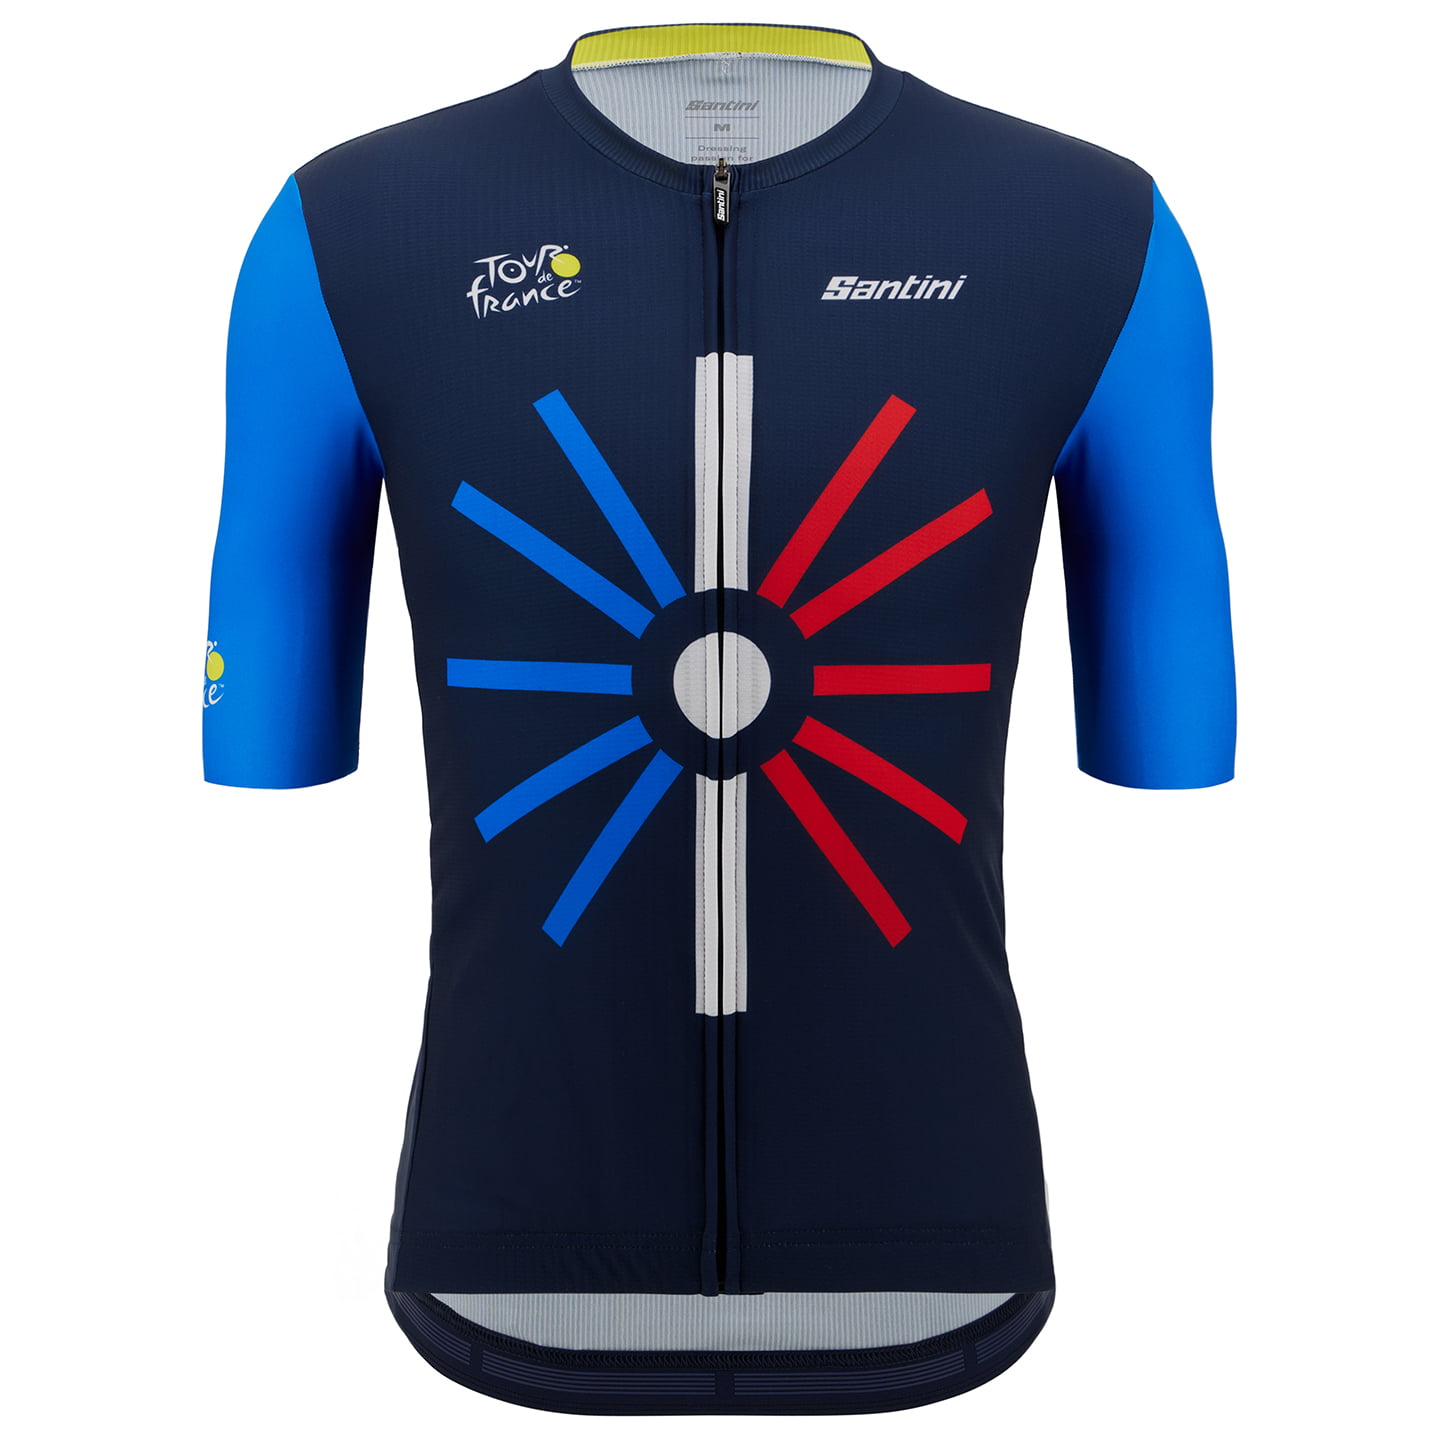 Tour de France Trionfo 2023 Short Sleeve Jersey, for men, size M, Cycle jersey, Cycling clothing